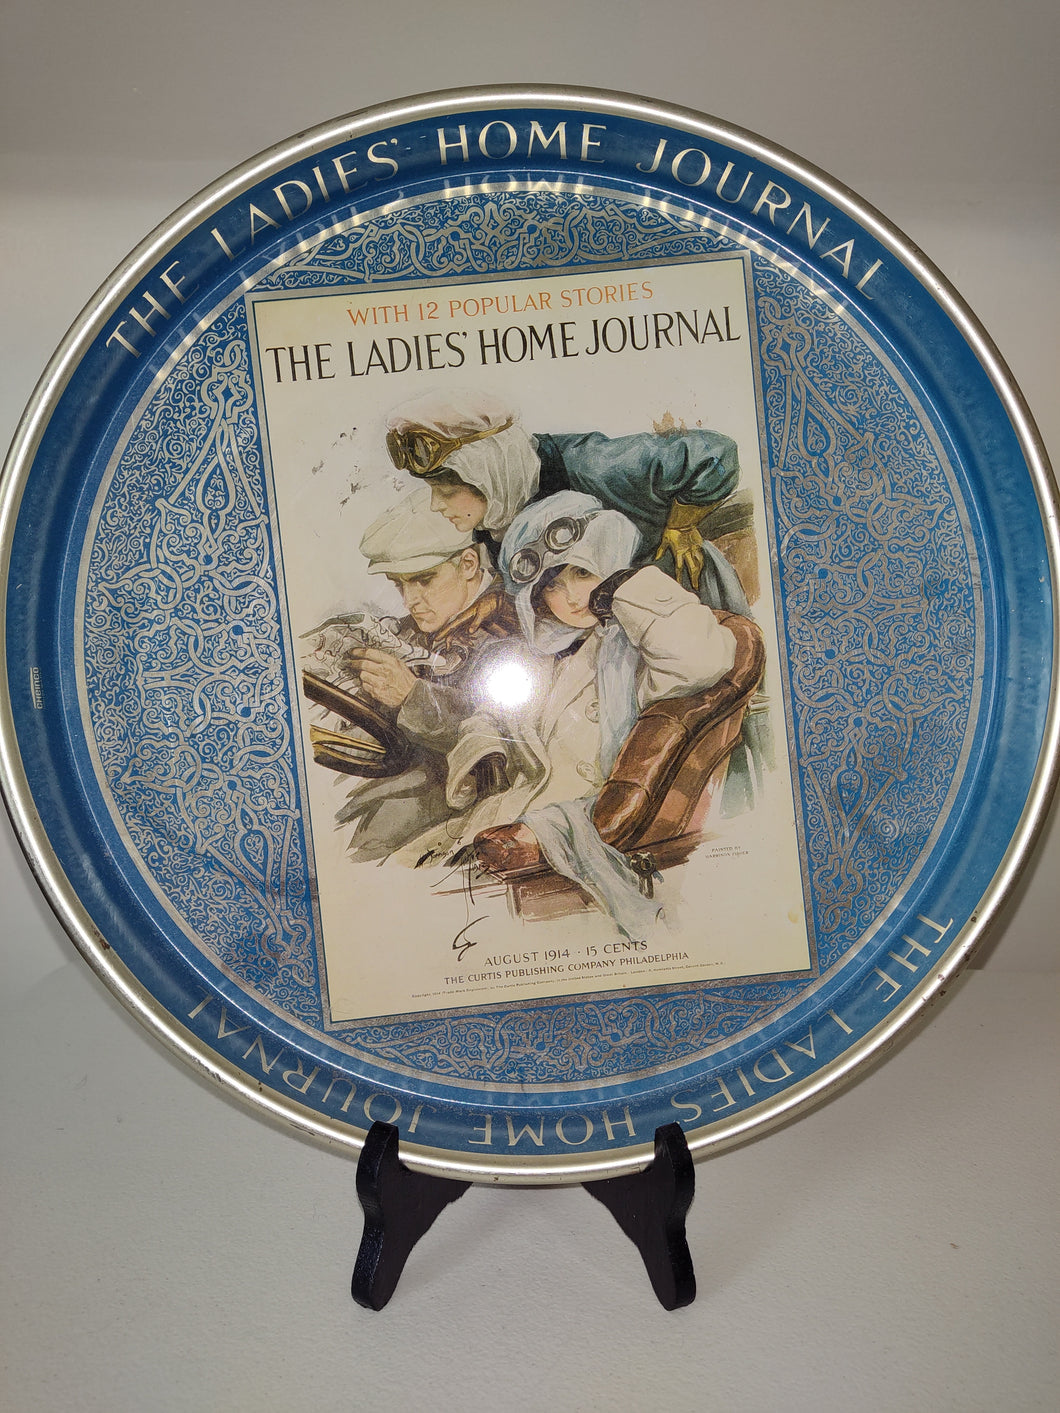 The Ladies Home Journal Vintage Serving Tray 